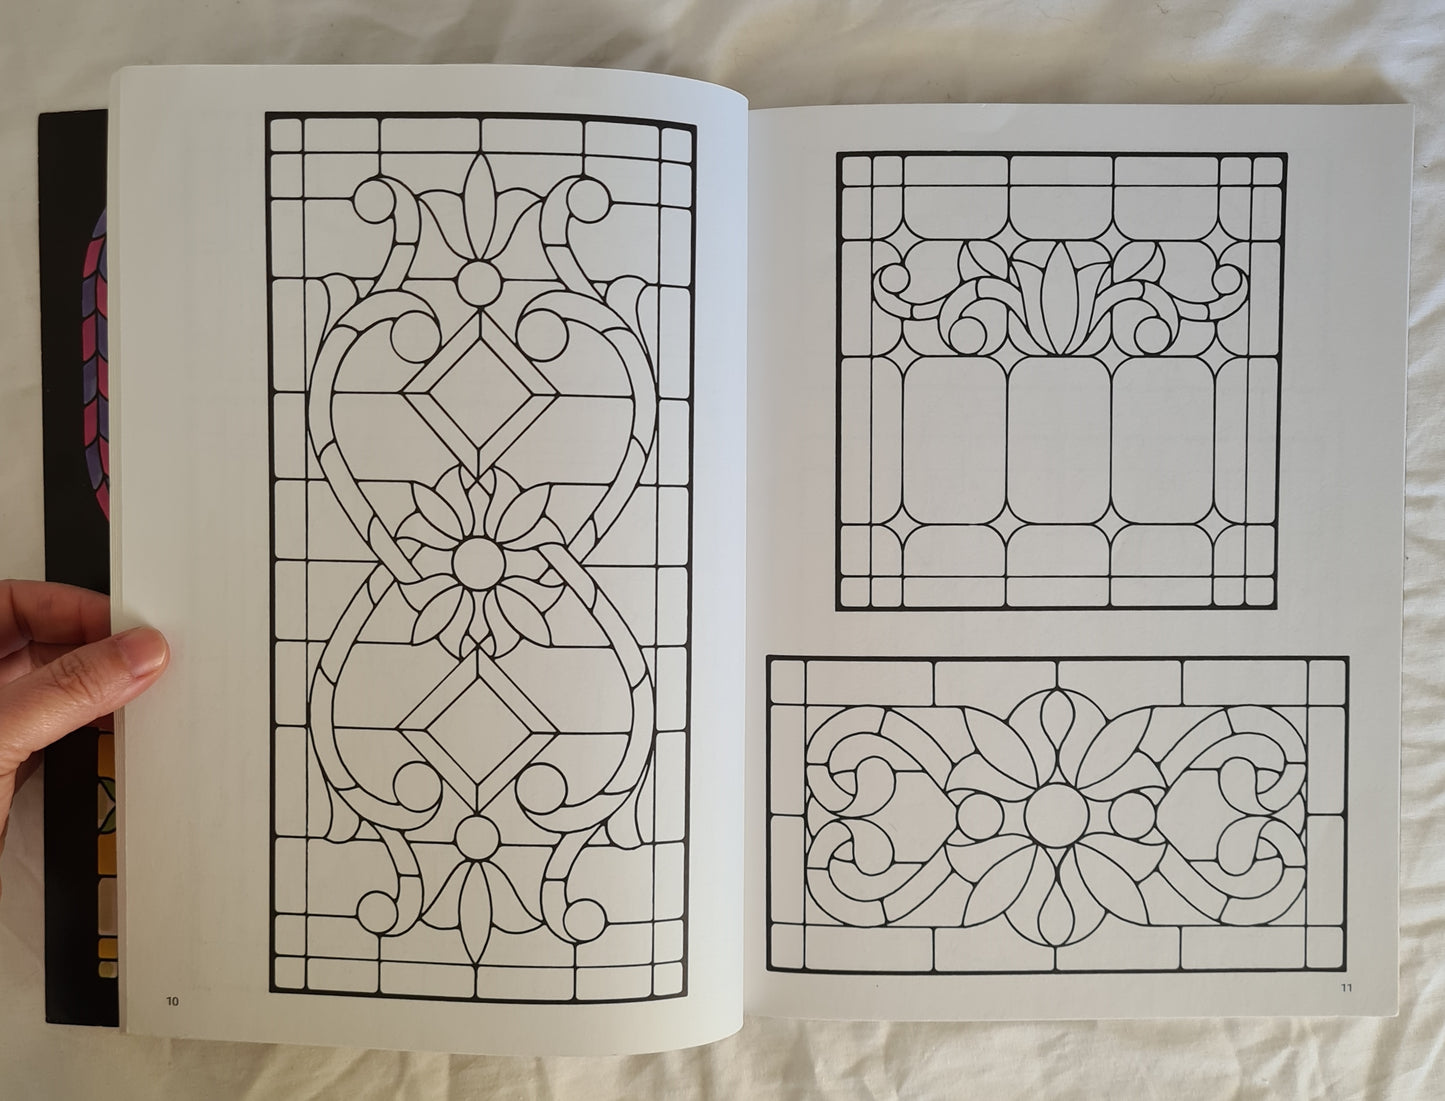 Victorian Stained Glass Pattern Book by Ed Sibbett, JR.